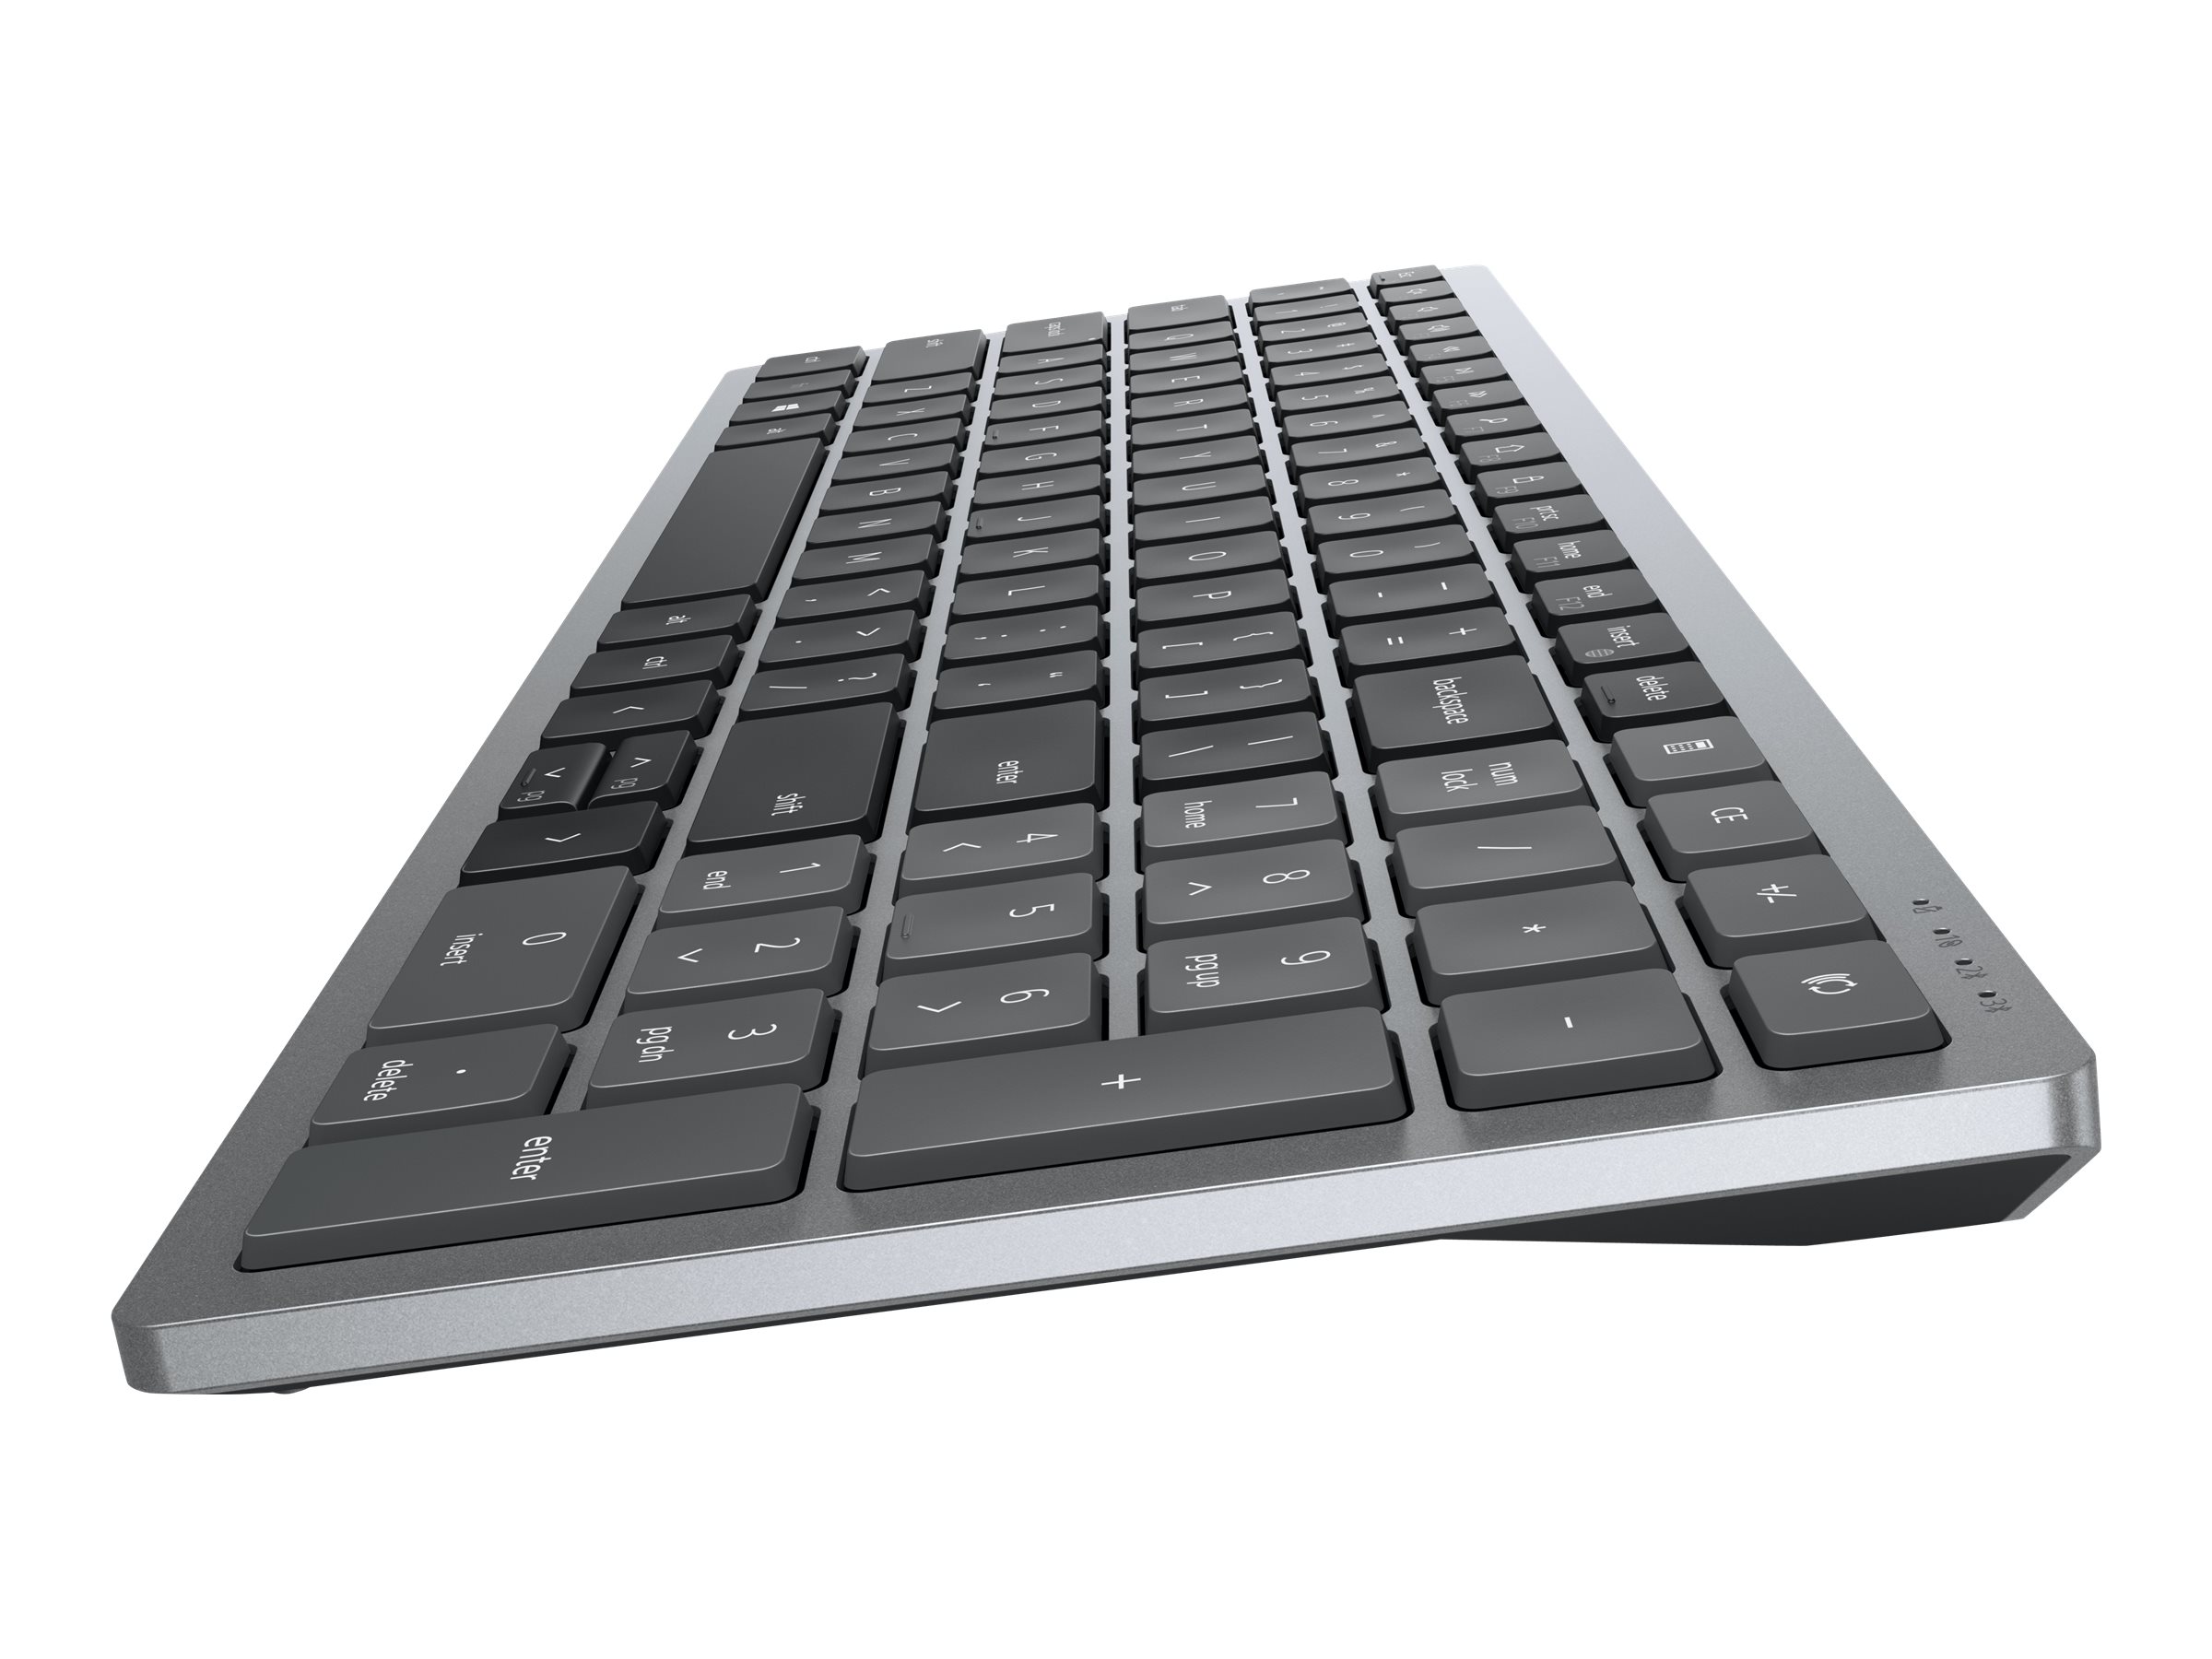 DELL Multi-Device Wireless Keyboard and Mouse - KM7120W - German QWERTZ